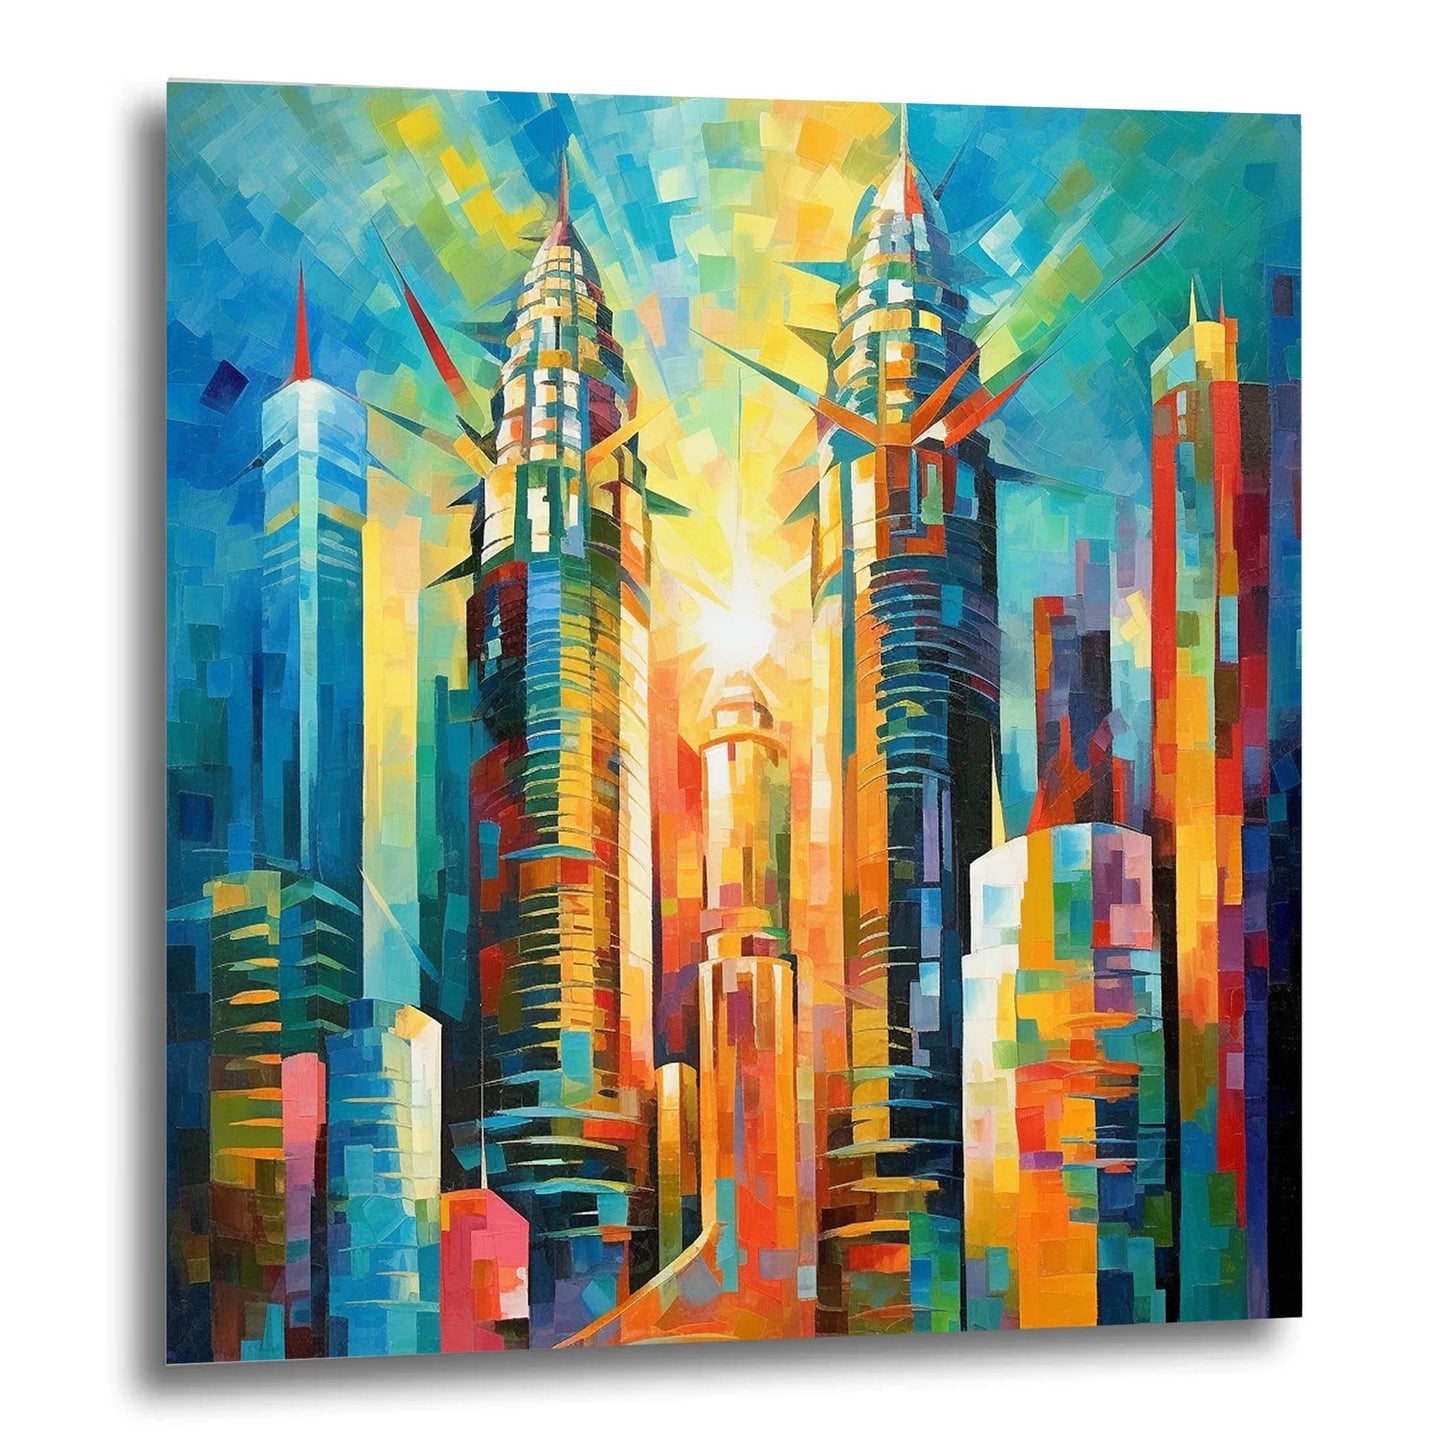 Petronas Towers Kuala Lumpur - Mural in the style of Expressionism